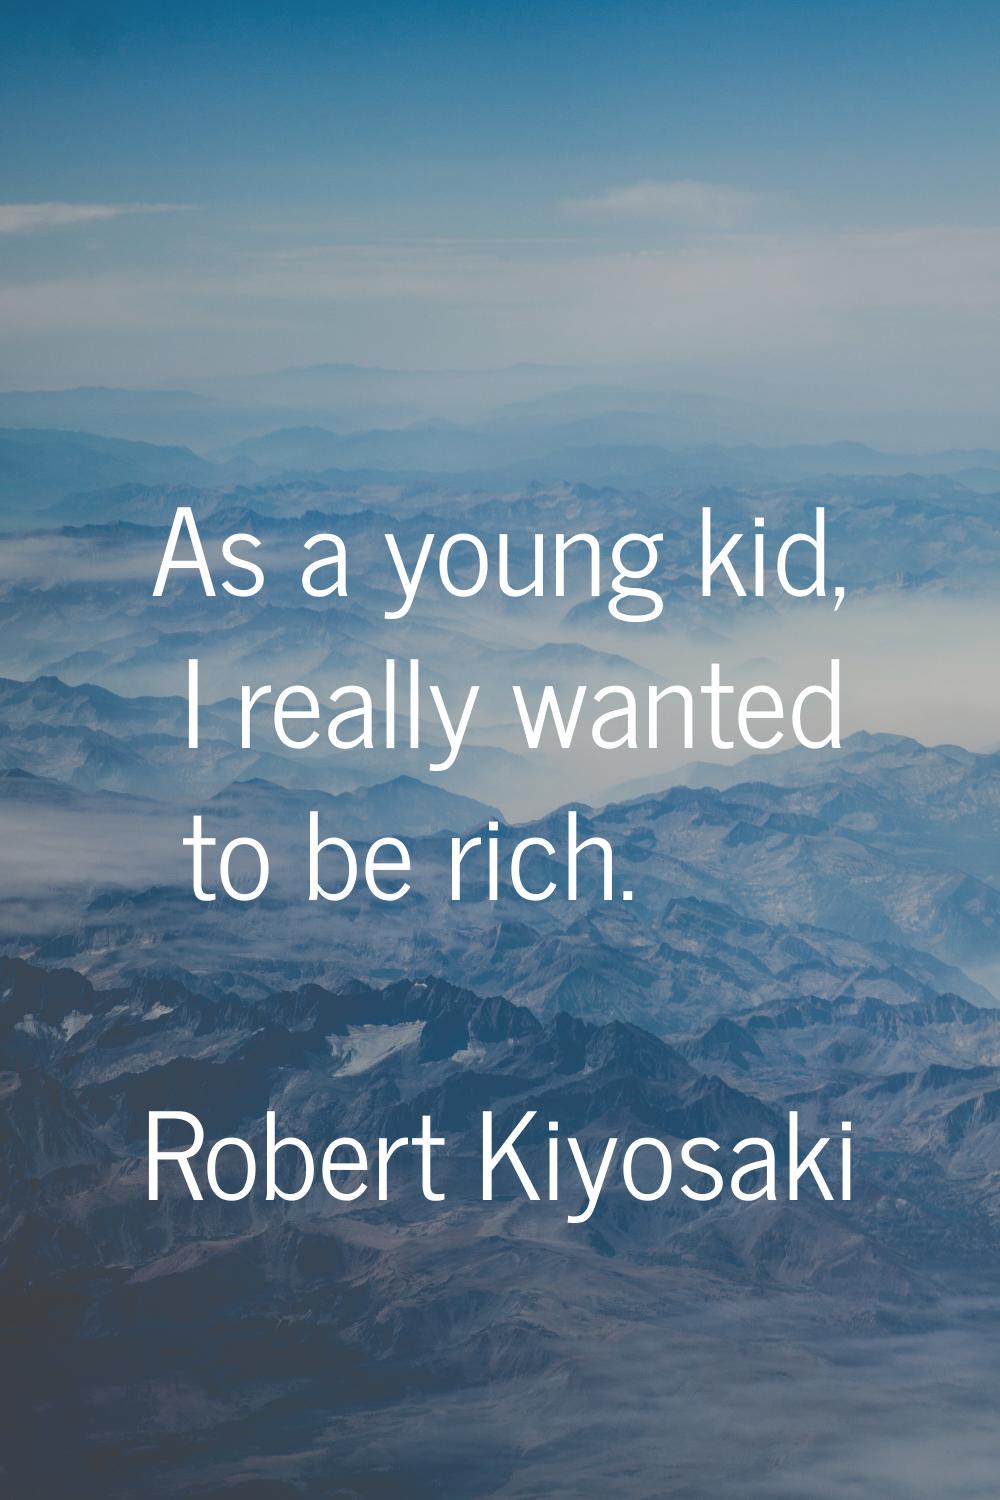 As a young kid, I really wanted to be rich.